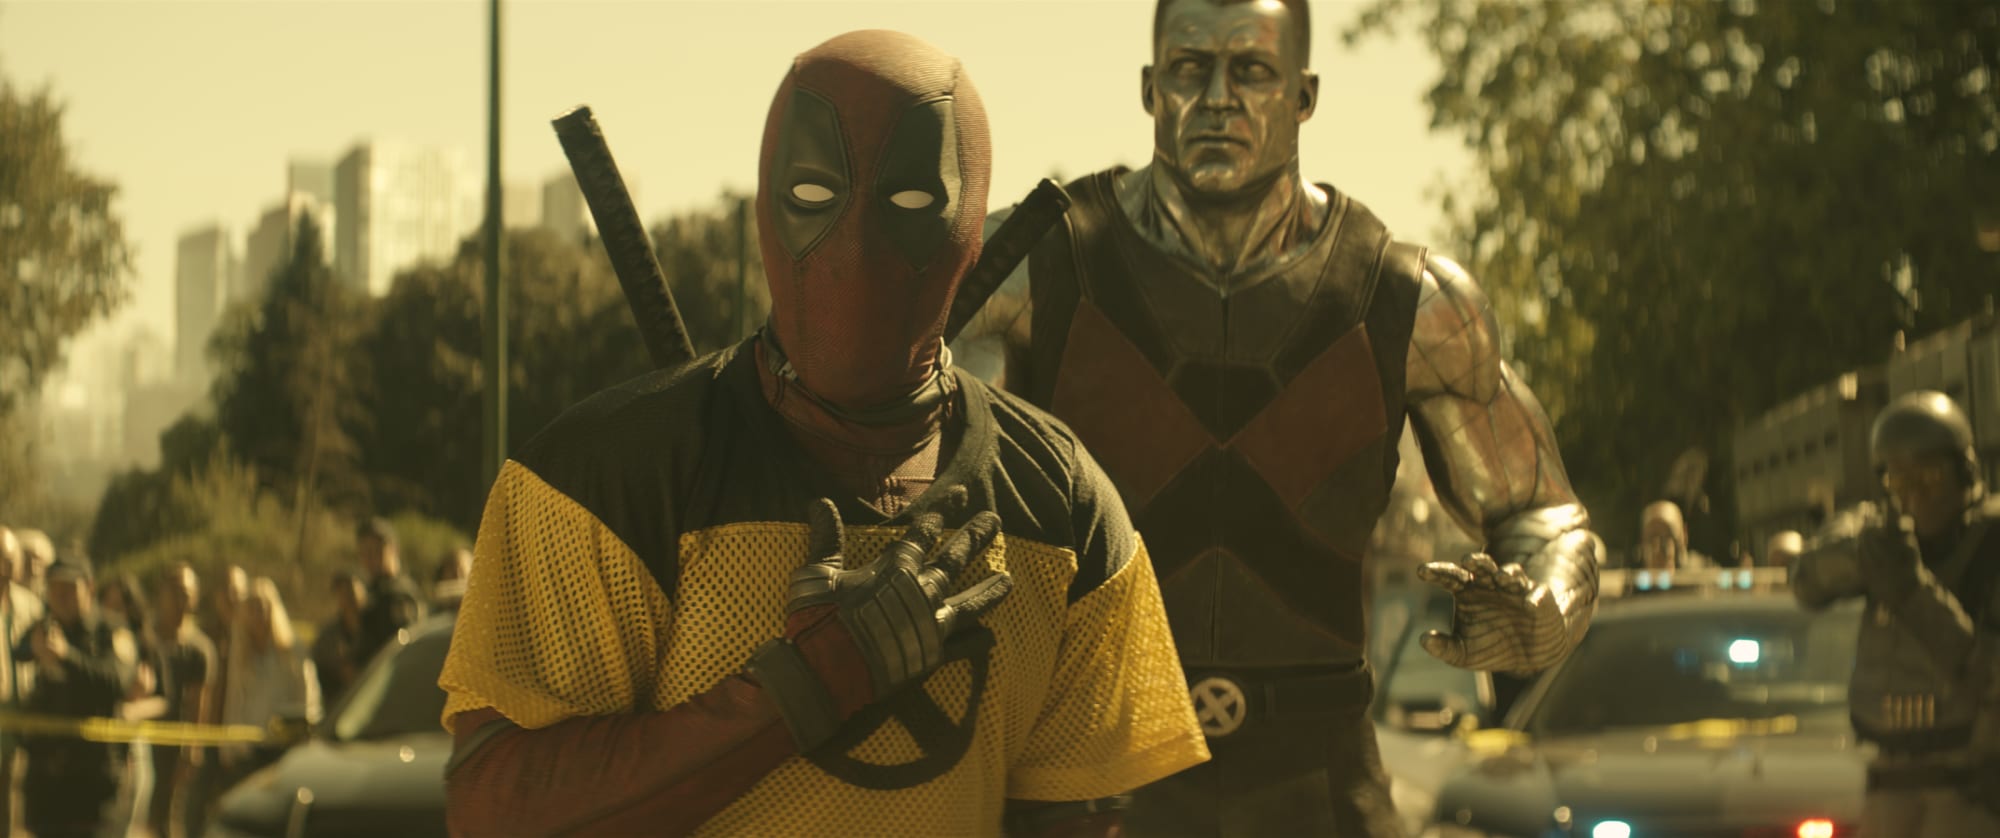 Deadpool: 4 of Wade and Wolverine’s defining comic book moments